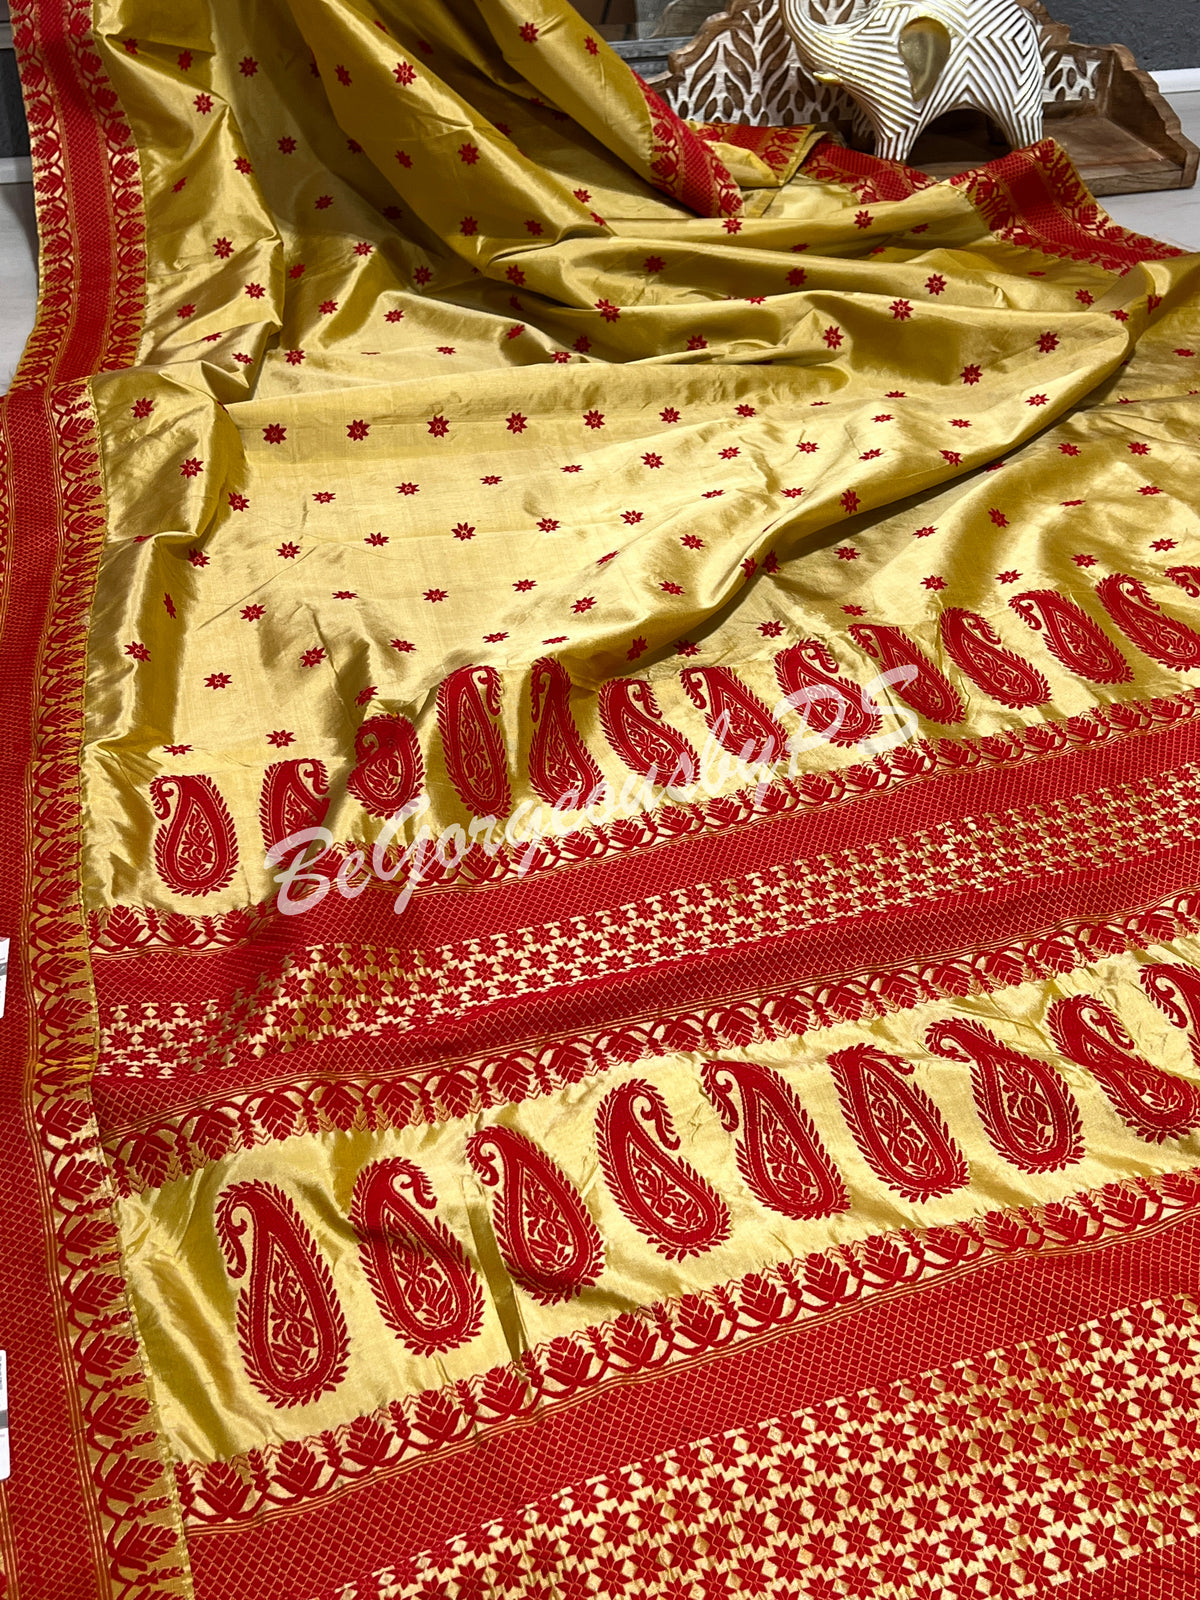 ASSAM SILK OFF WHITE AND RED SAREE